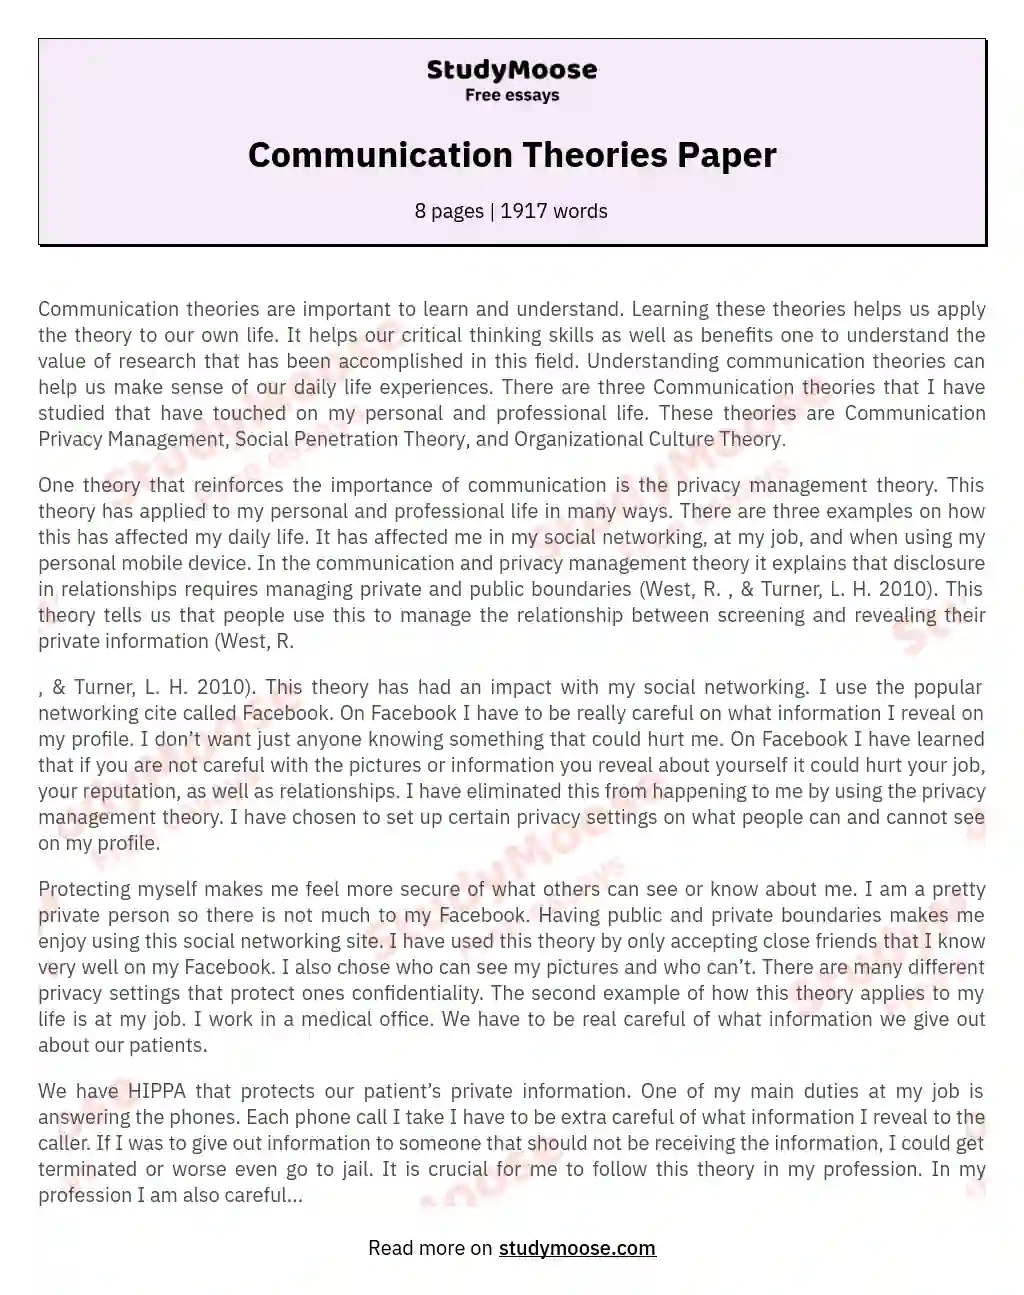 Communication Theories Paper essay